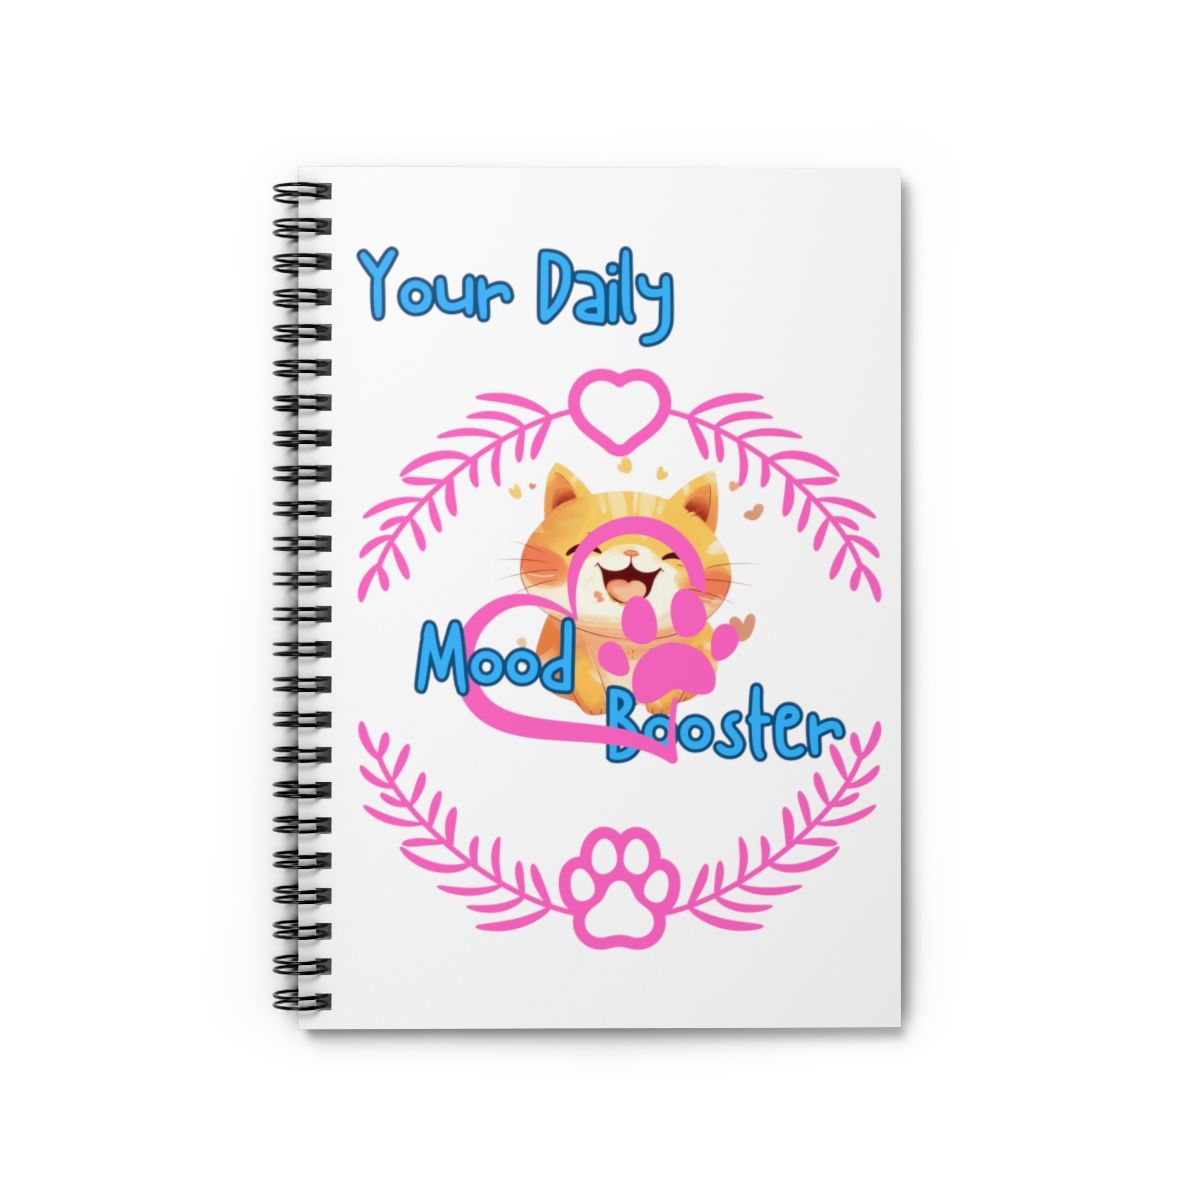 Moodbooster Spiral Notebook - Ruled Line